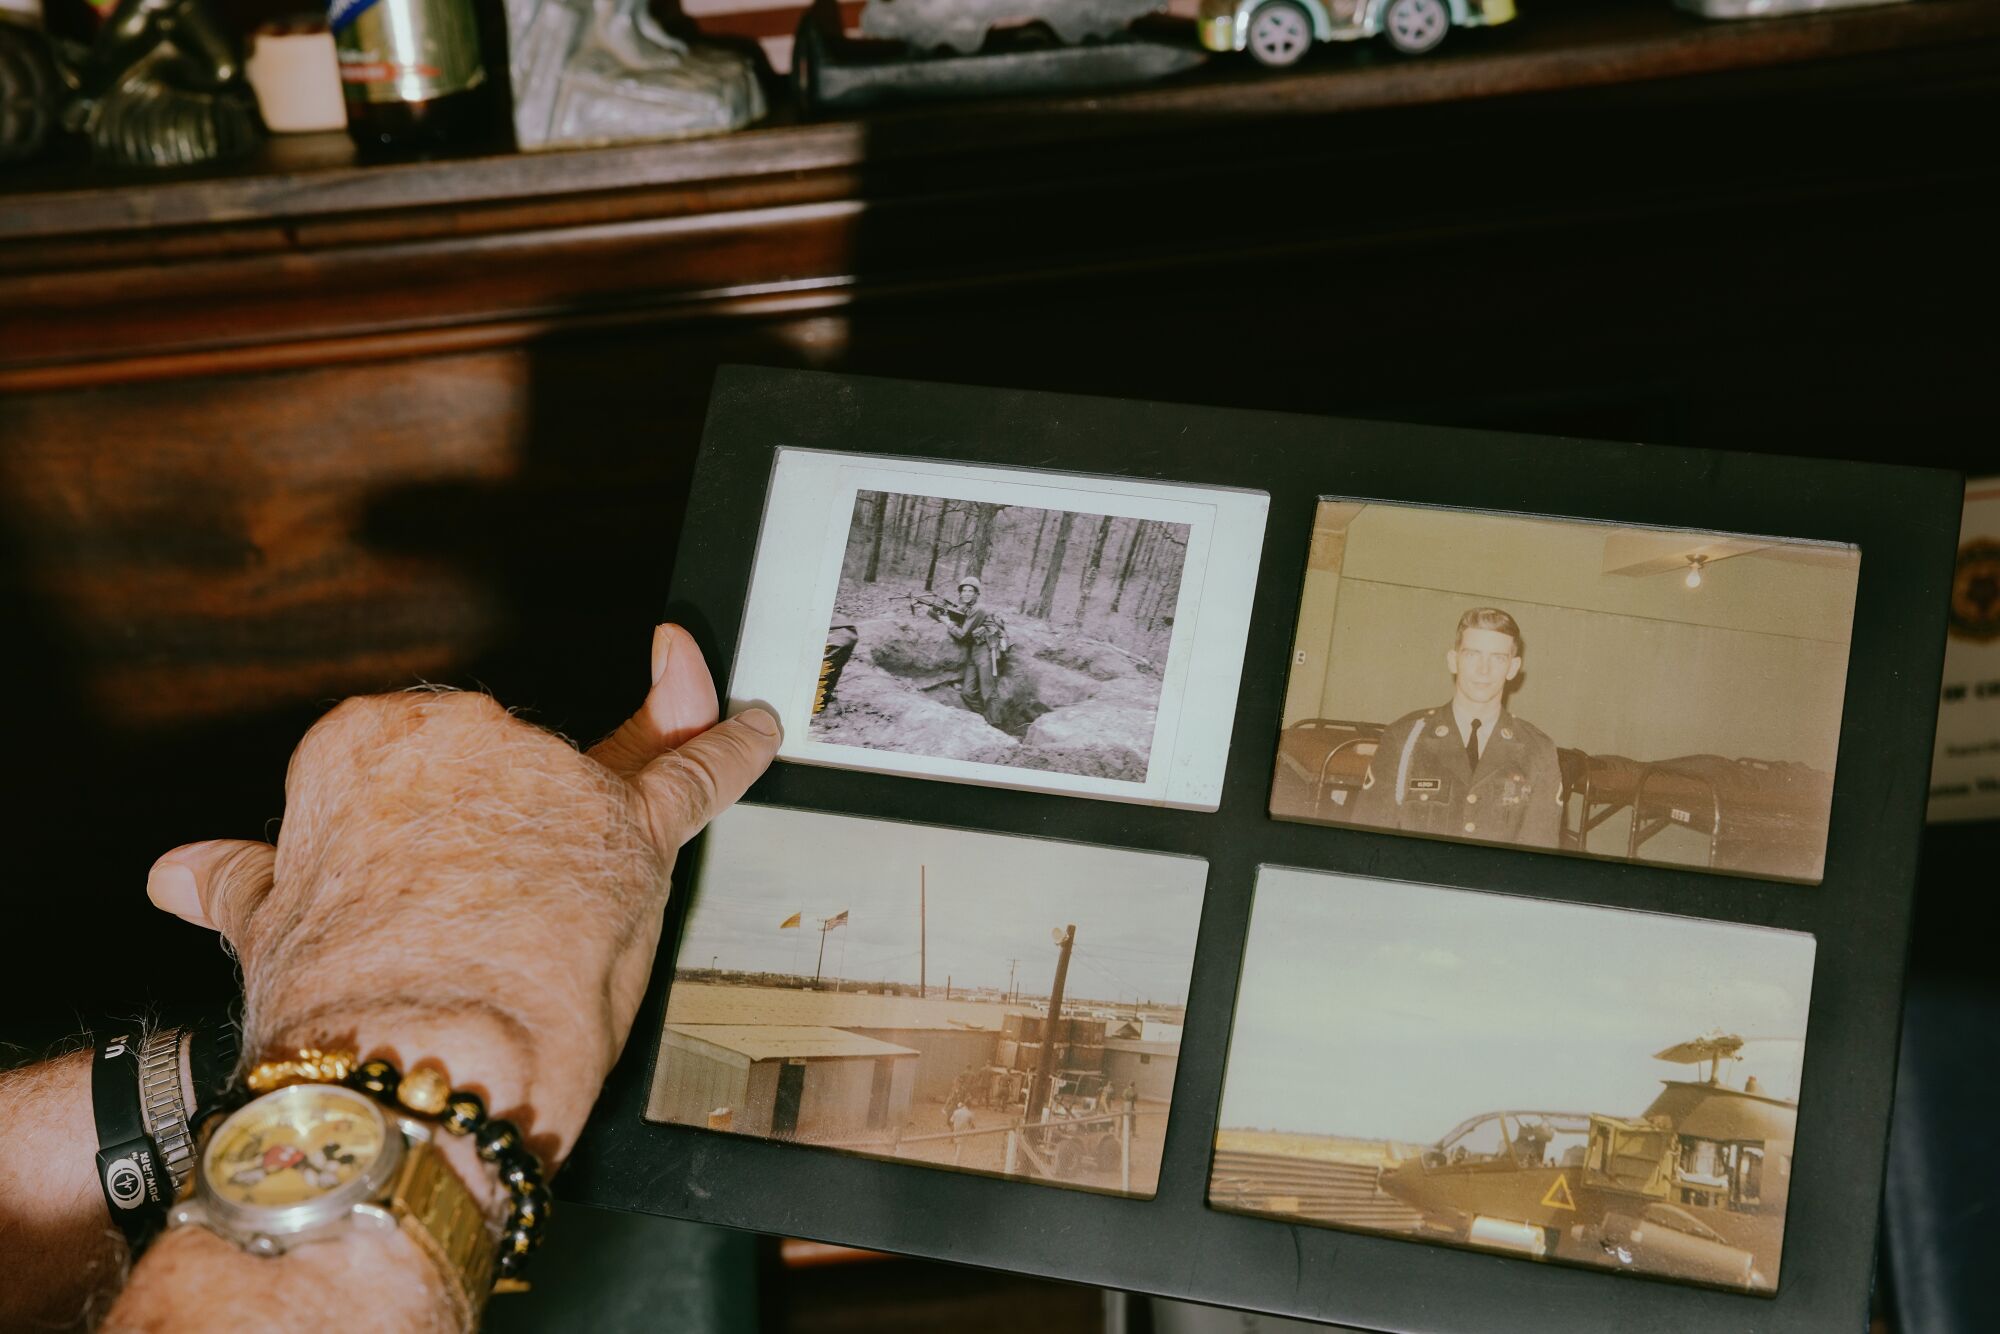 Gene Ulrich shows a photo of himself in Army training.